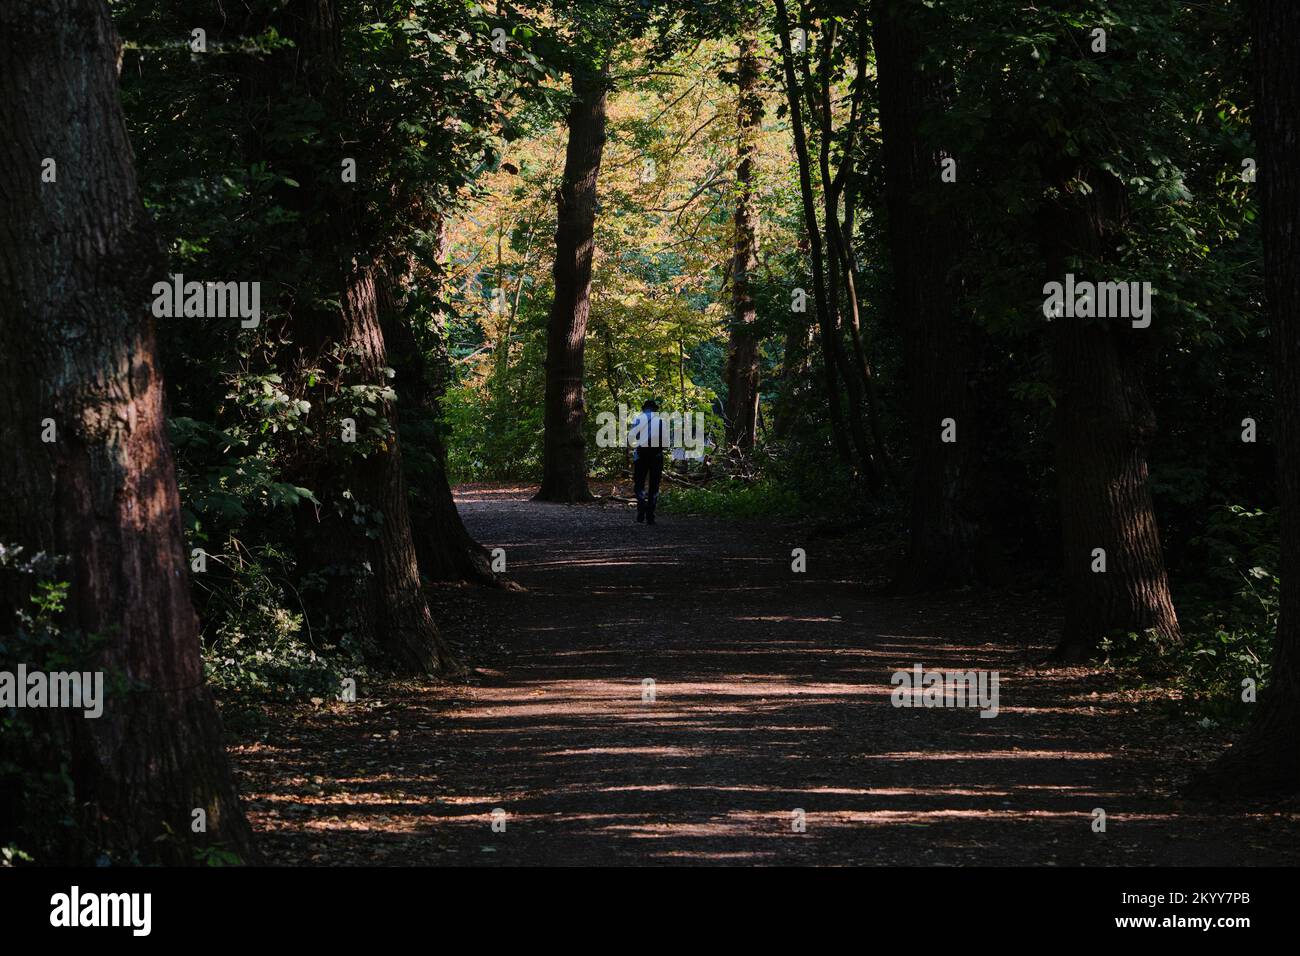 On a hot summer day a couple walks in the shade of the trees that border a path in Wanstead park, London, taking advantage of the coolness. Stock Photo